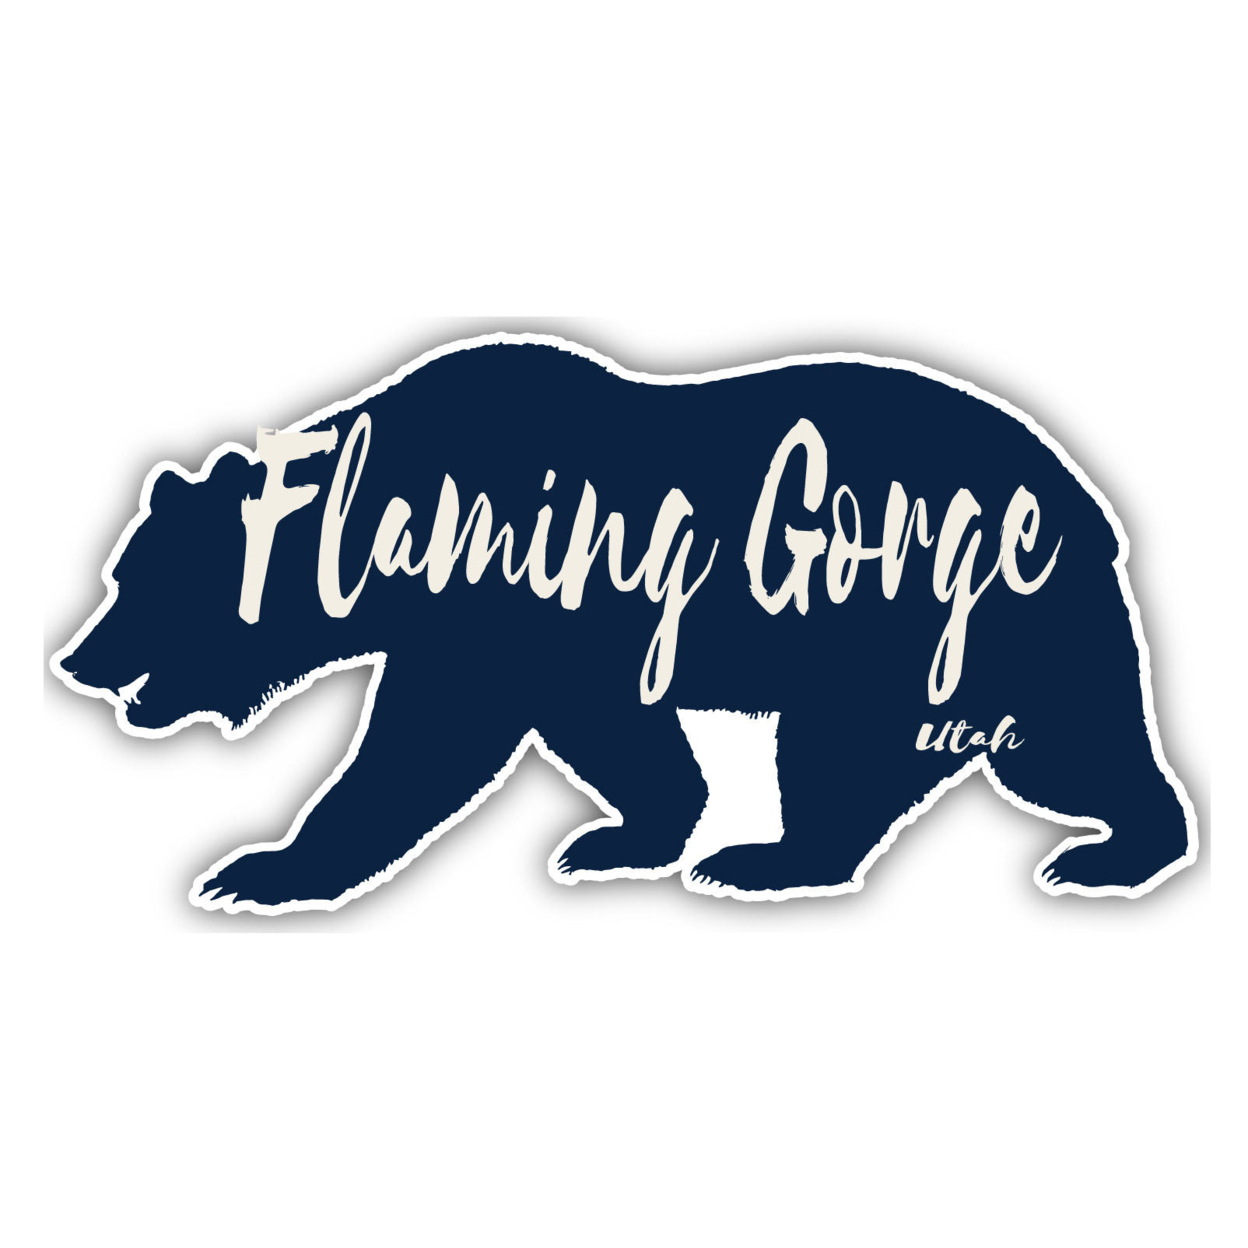 Flaming Gorge Utah Souvenir Decorative Stickers (Choose Theme And Size) - 4-Pack, 10-Inch, Bear